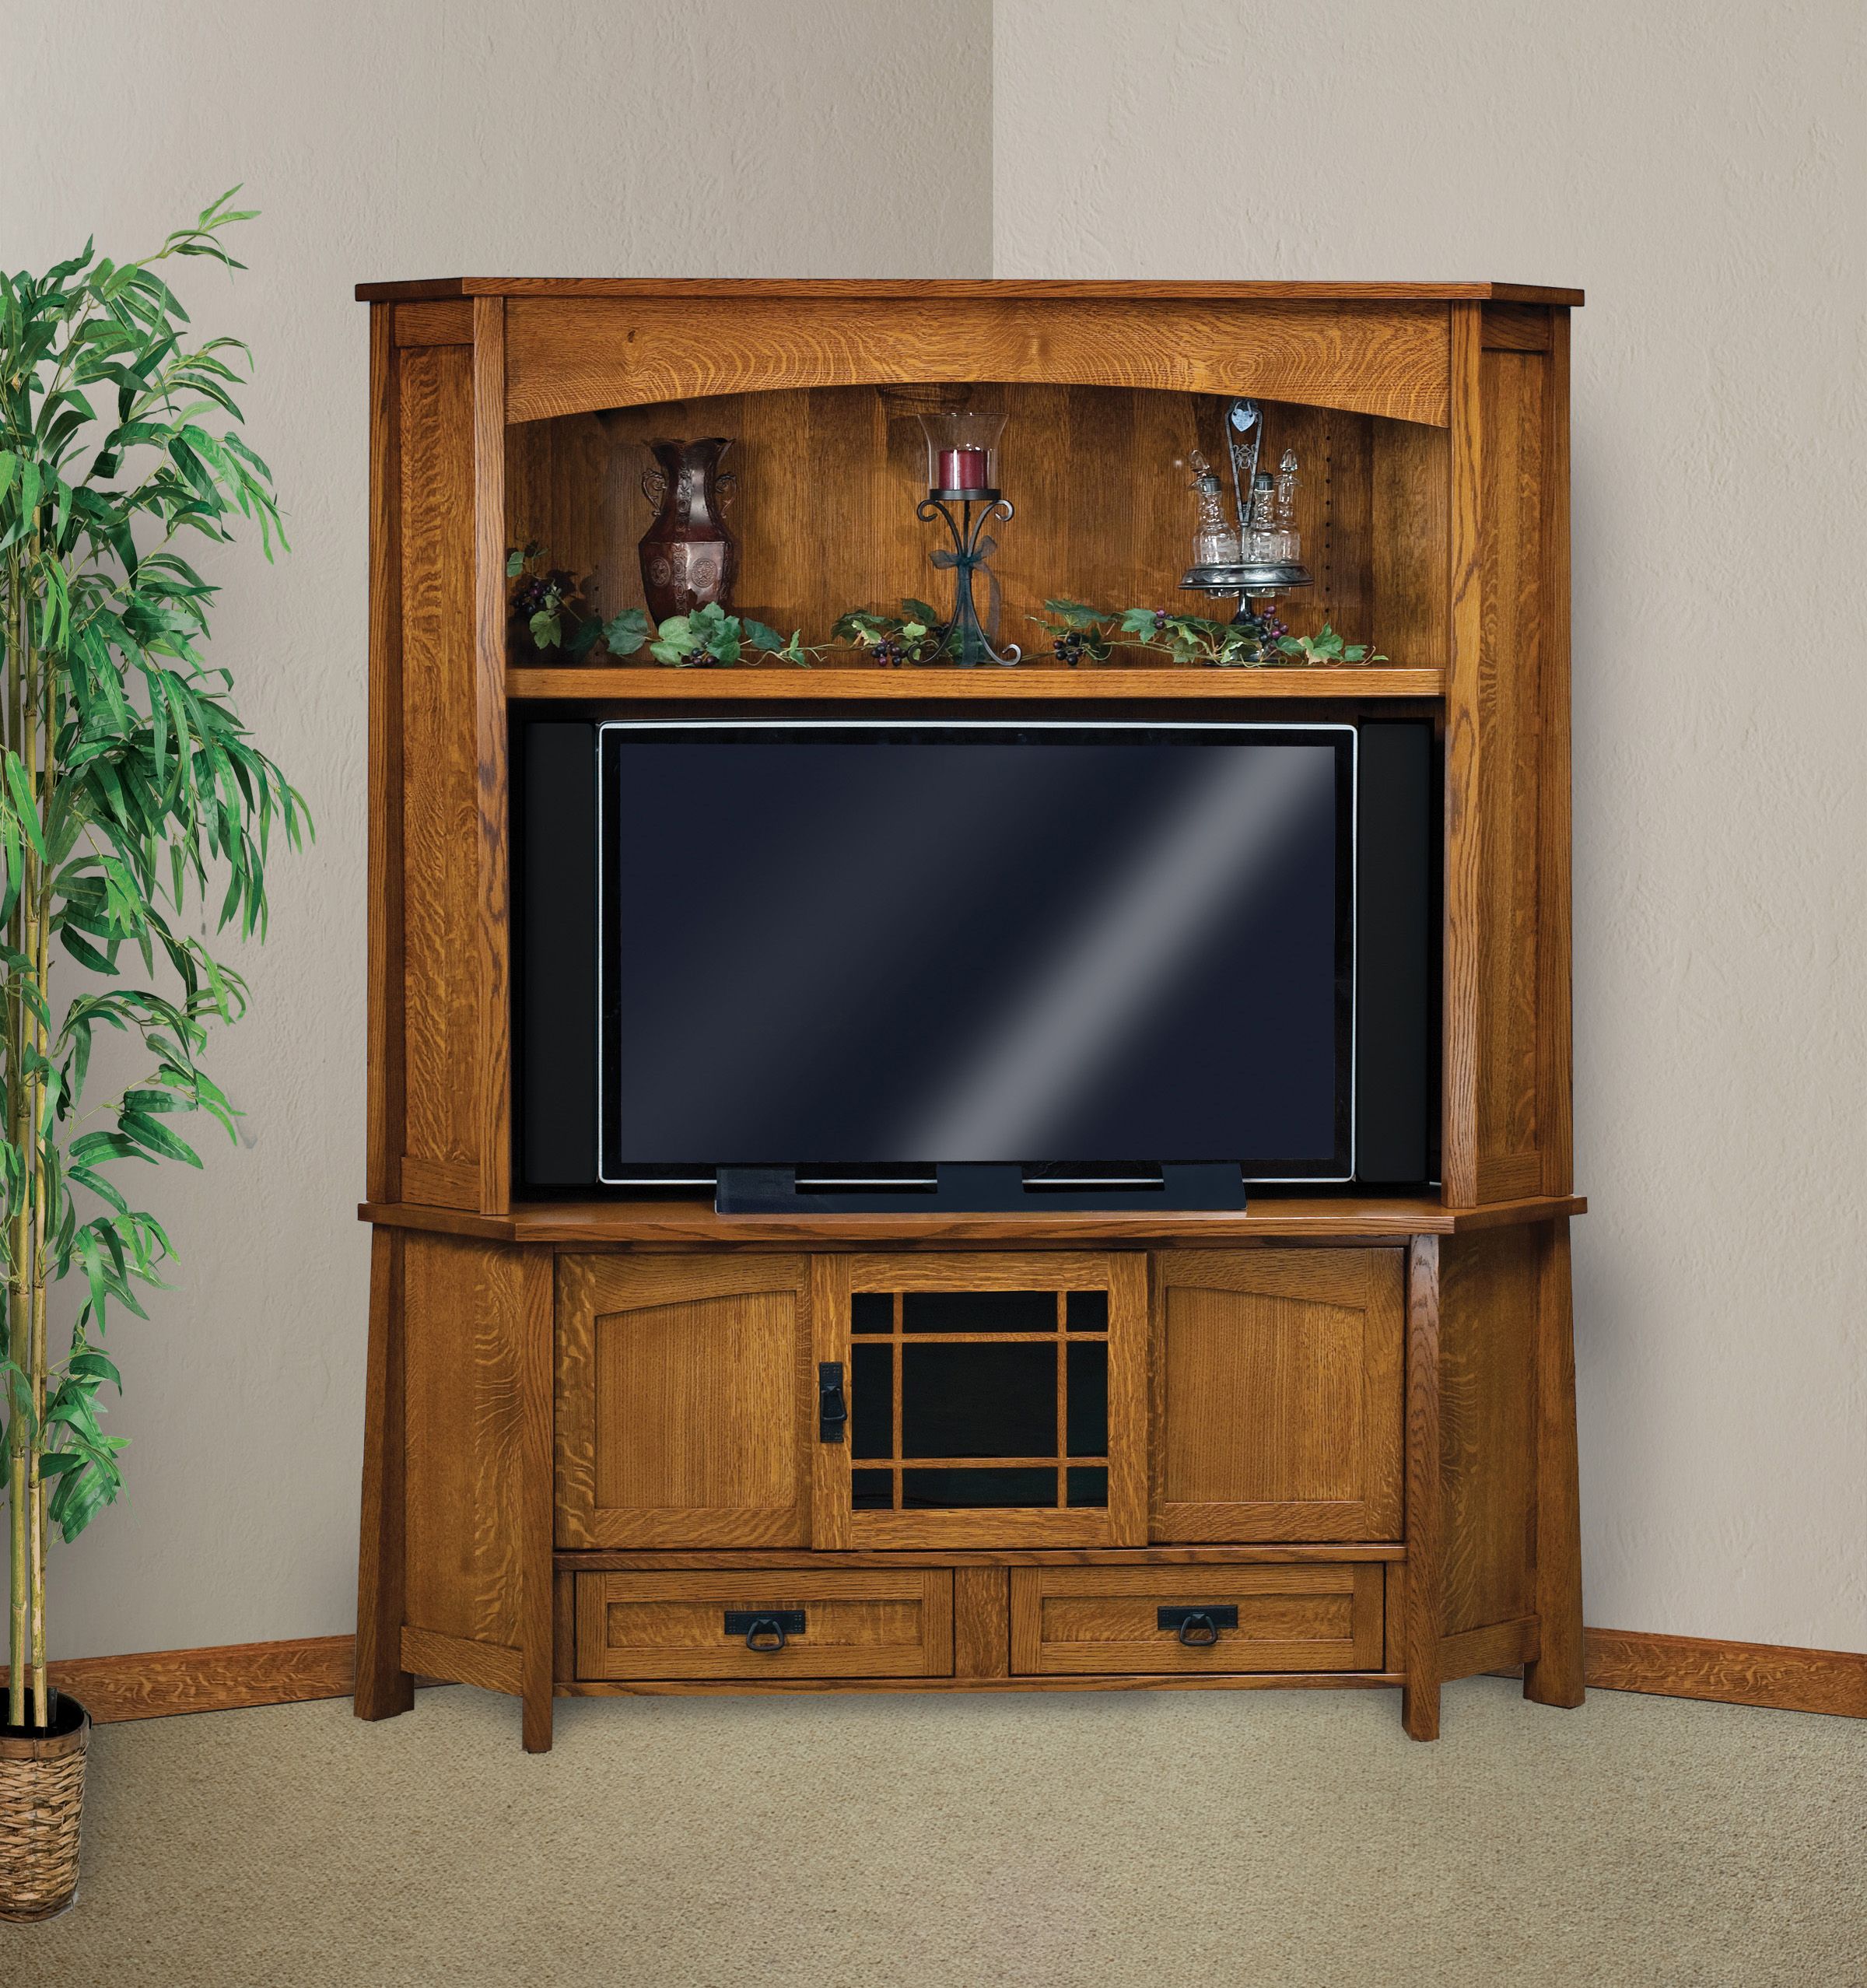 Modesto Corner Tv Hutch | Amish Solid Wood Tv Stands | Kvadro Furniture Inside 110" Tvs Wood Tv Cabinet With Drawers (View 6 of 20)